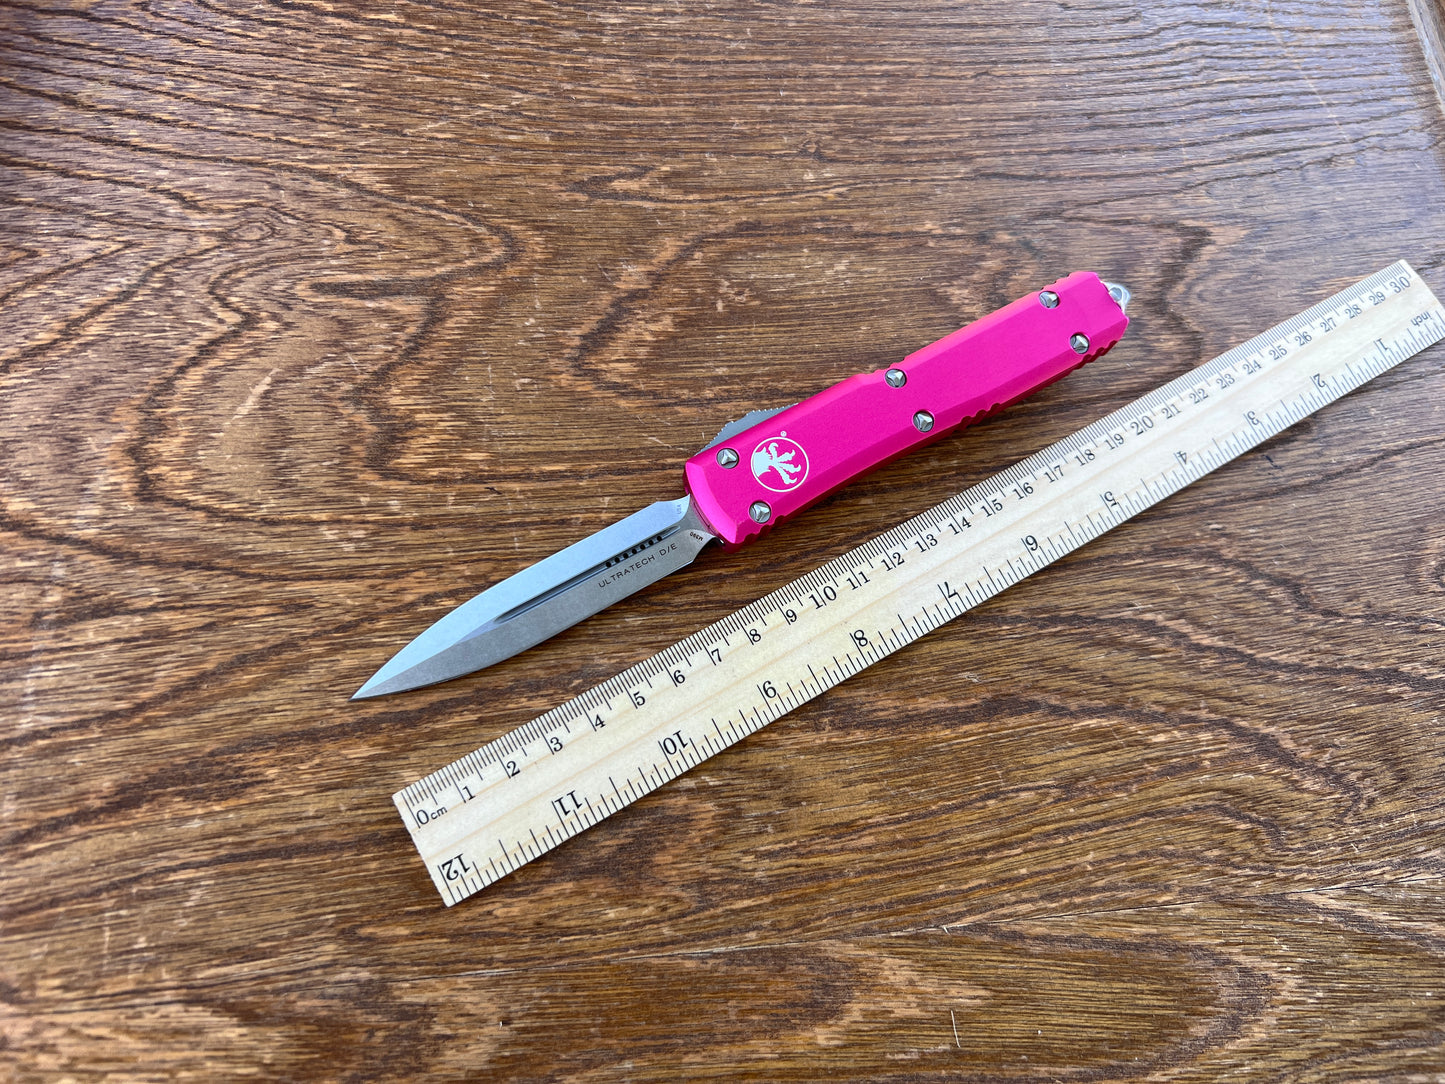 Microtech 122-10PK Ultratech AUTO OTF 3.46" Stonewashed Double Edge Dagger Blade, Pink Aluminum Handles